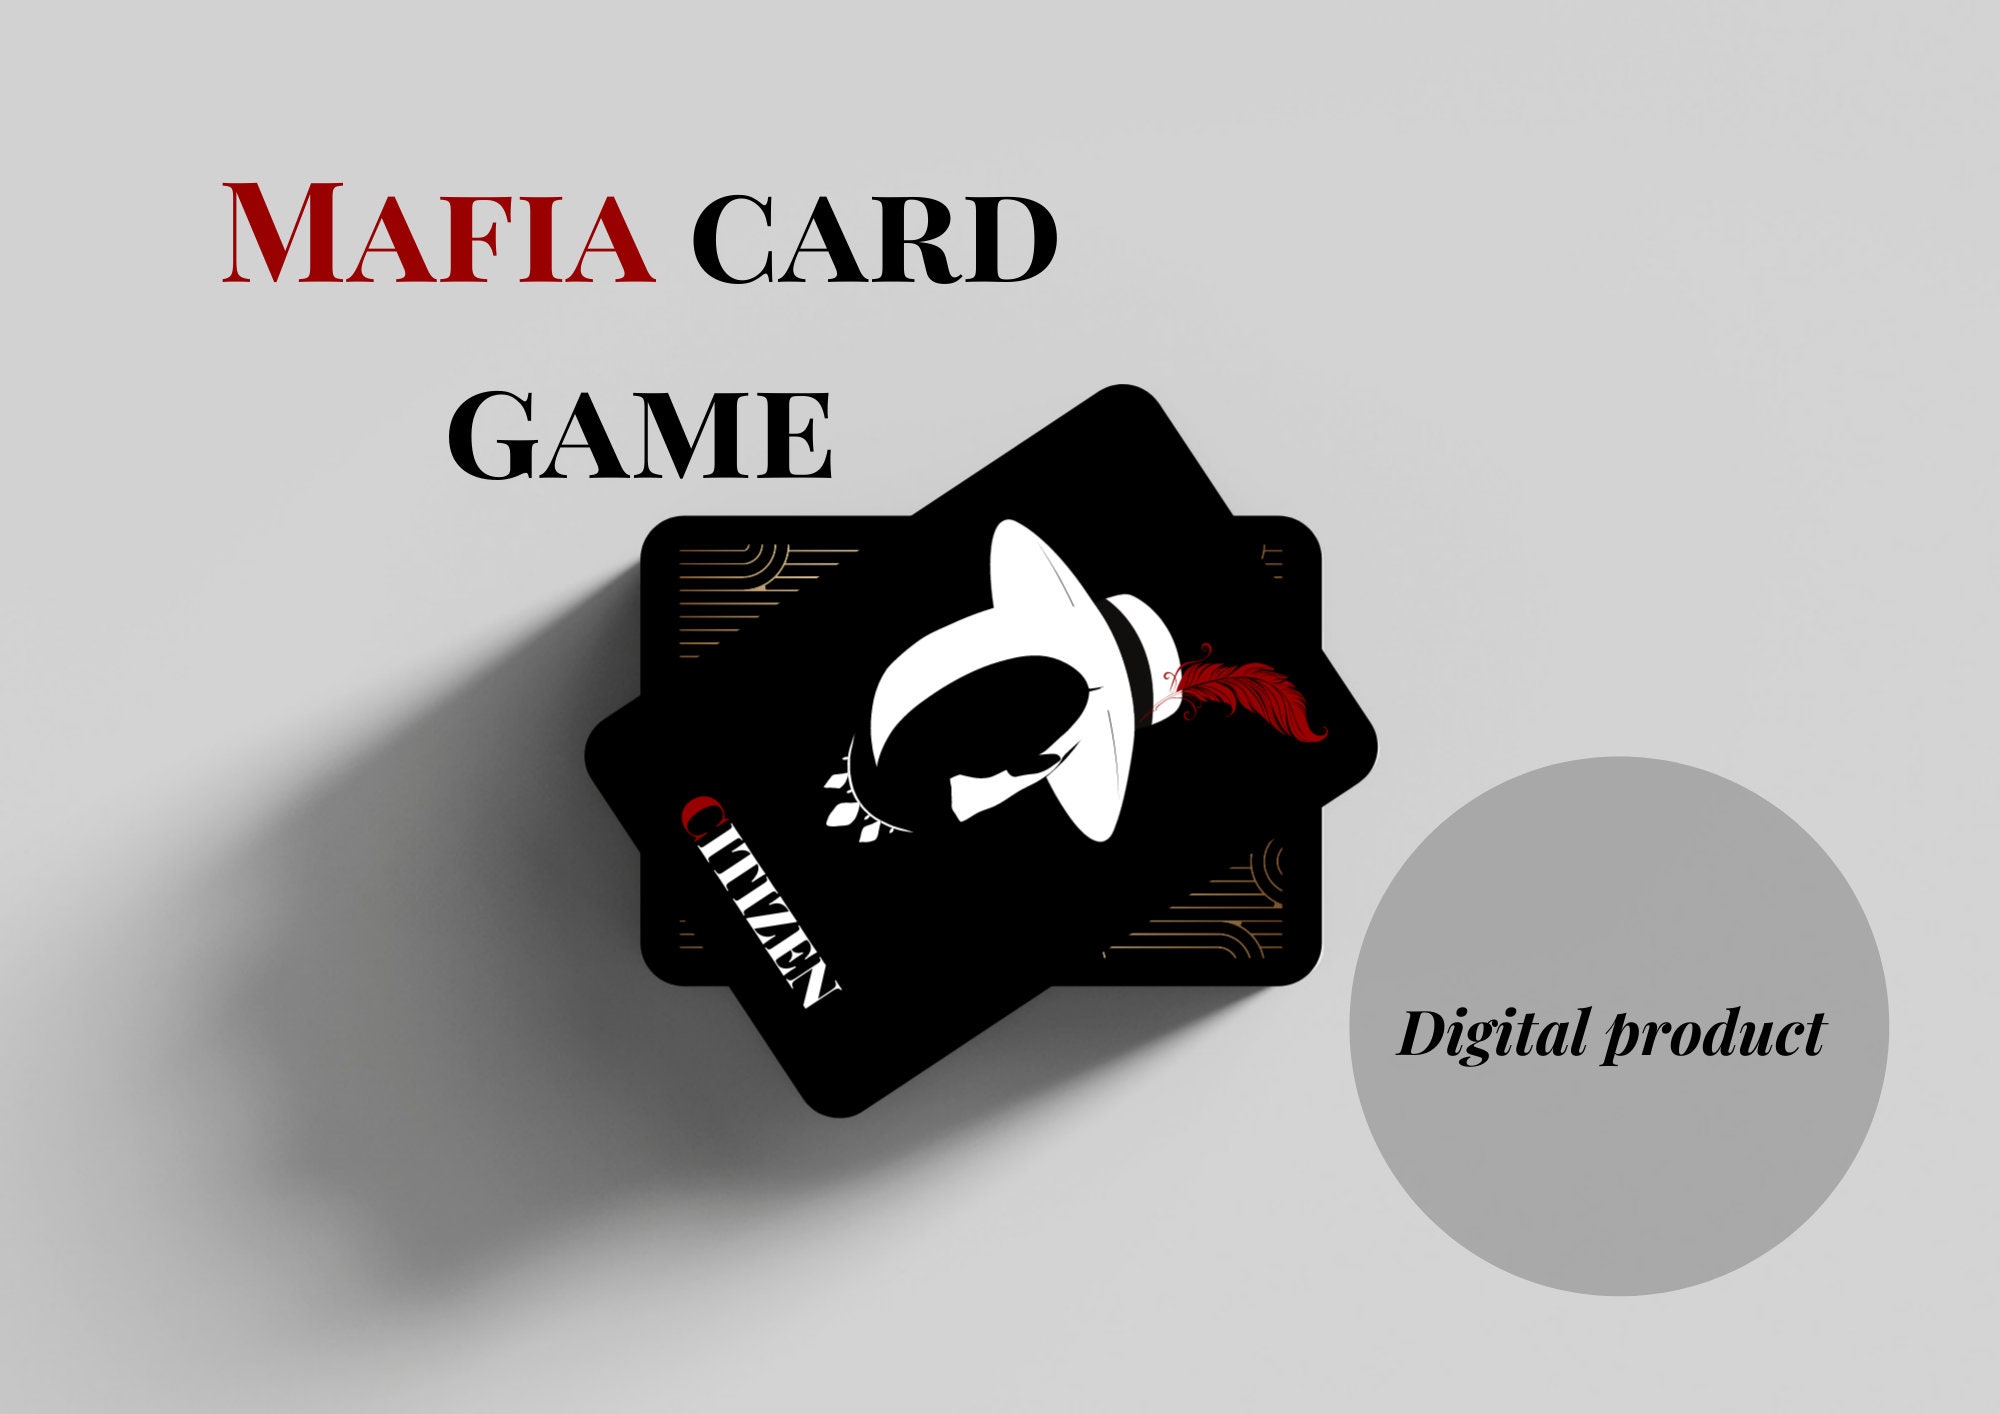 Apostrophe Games Mafia The Party Game – Game of Lying, Bluffing, Deceit –38  Role Cards, Card Game for Adults and Teens – Interactive Board Game for